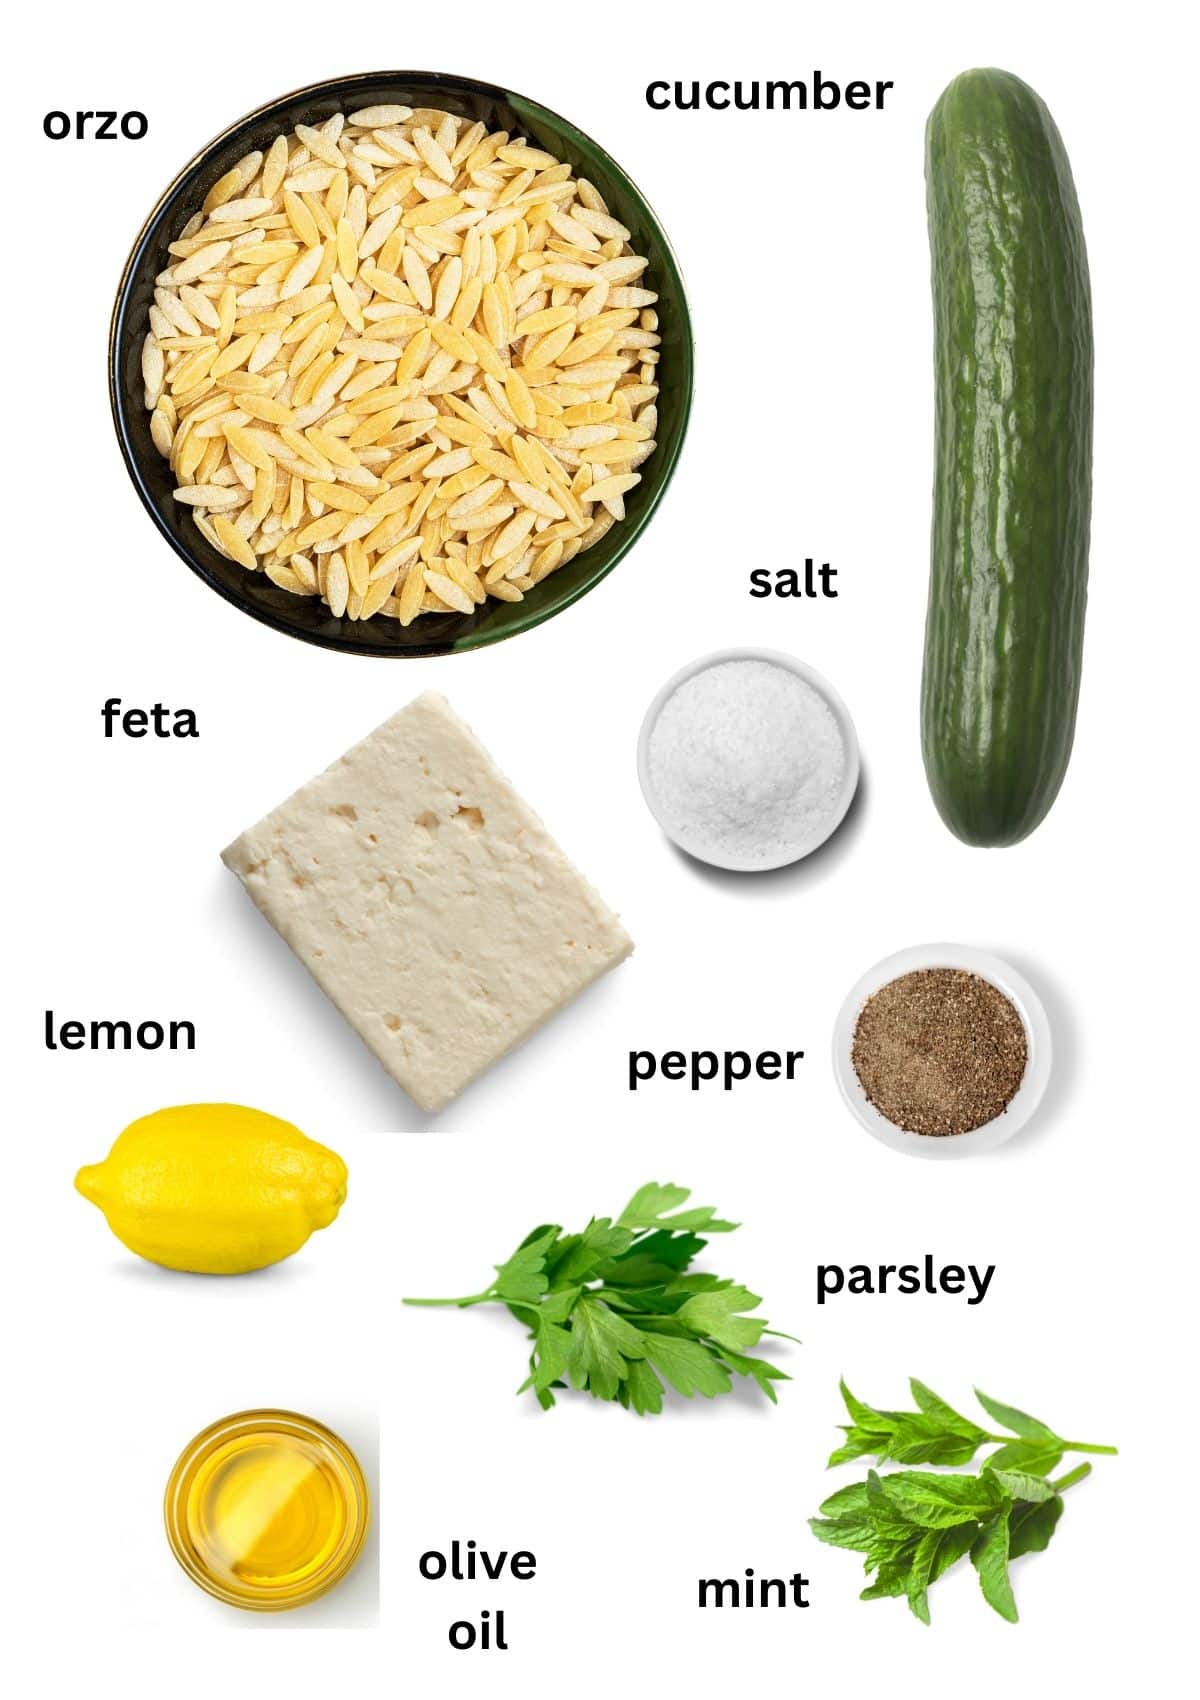 labeled ingredients for making pasta salad with orzo, lemon, cucumber, feta, mint, and parsley.